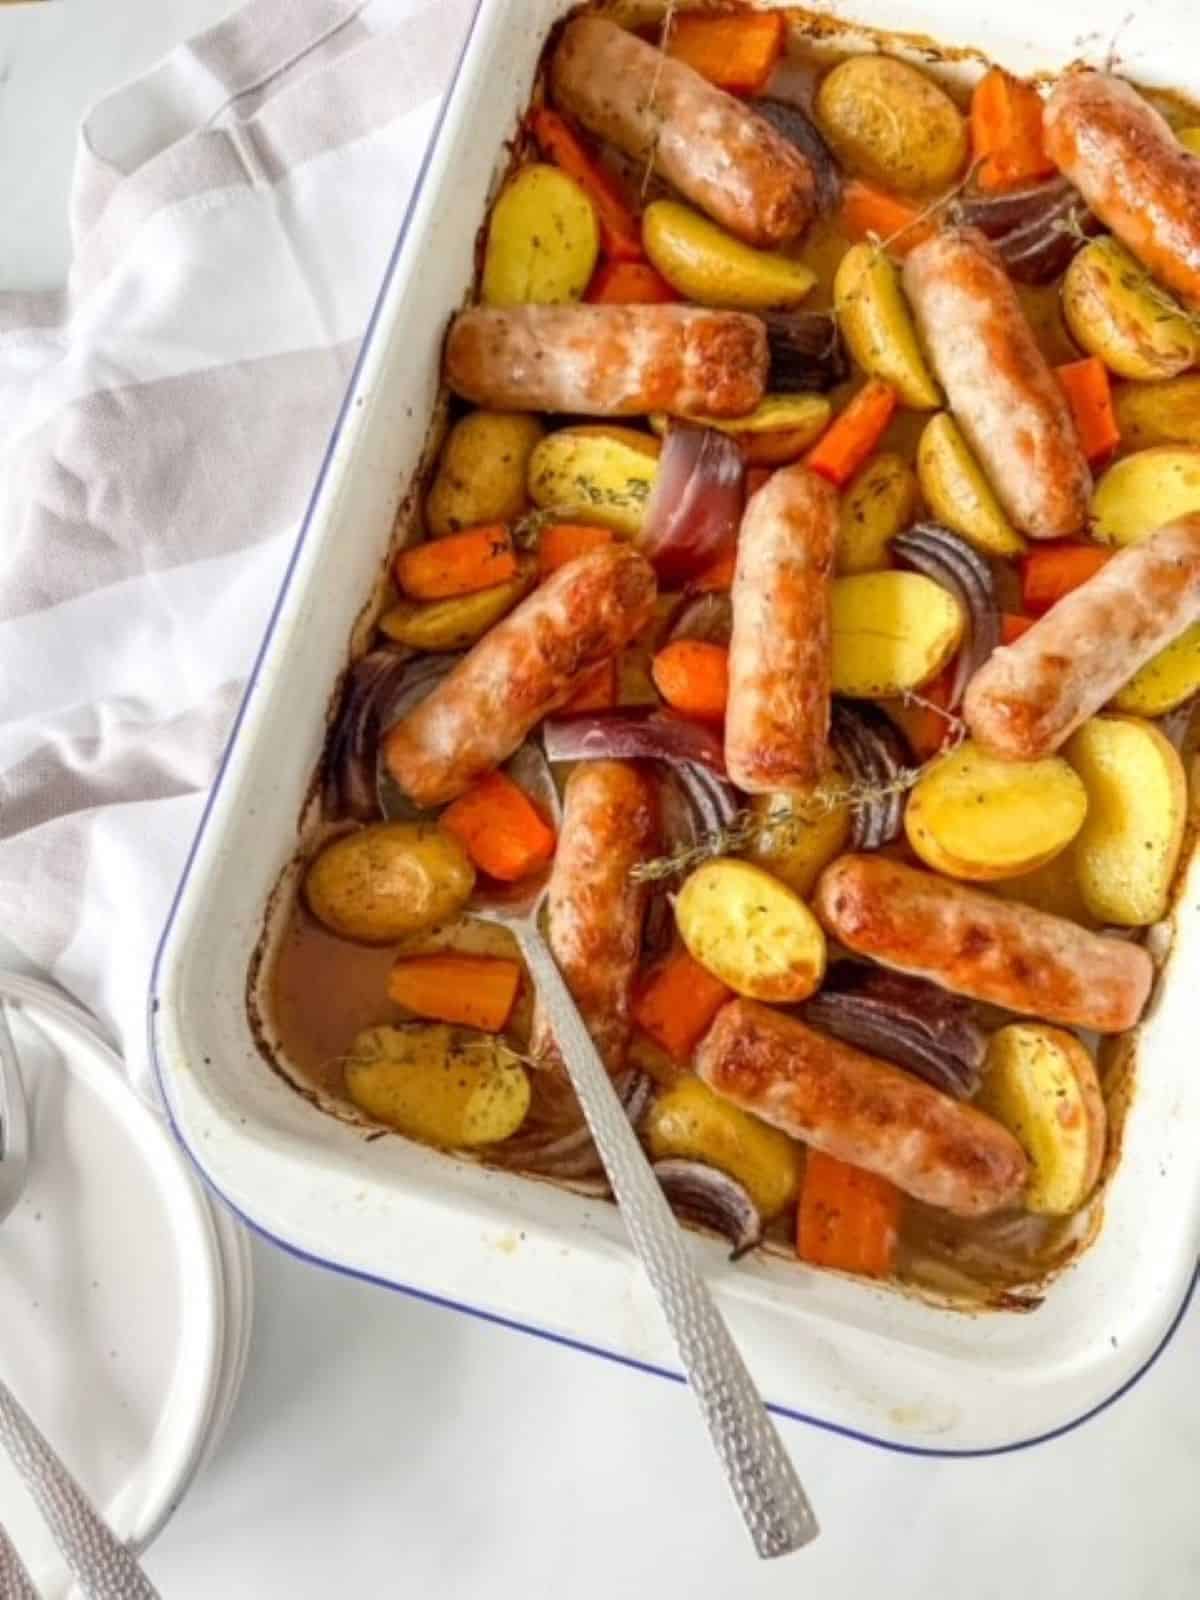 Delicious sausage and vegetable casserole.